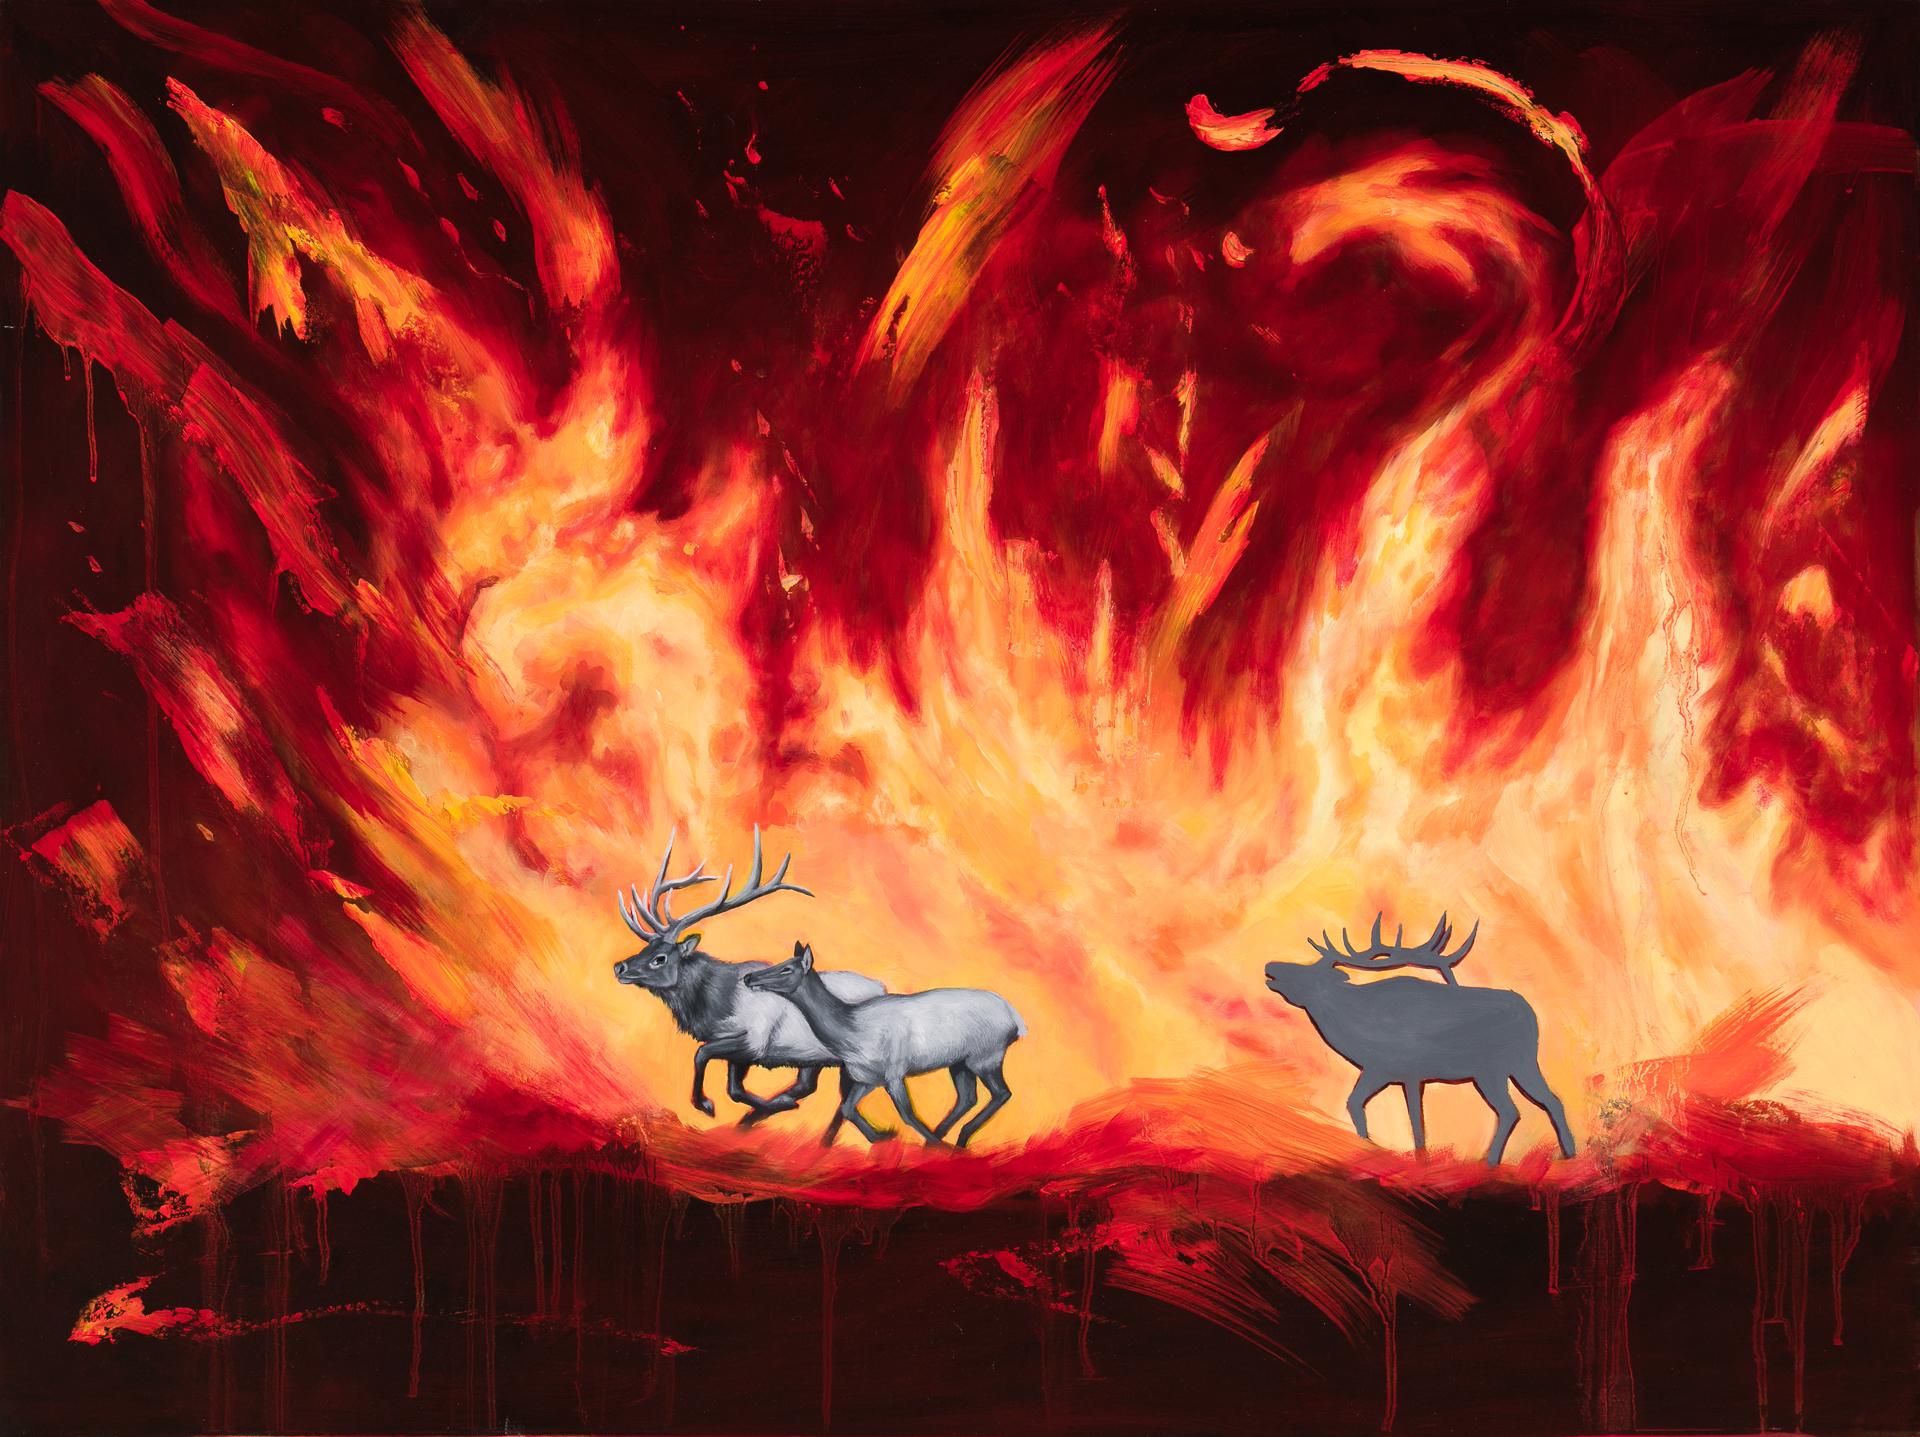 Robin Hextrum Animal Painting - "Out of the Flames" Oil Painting